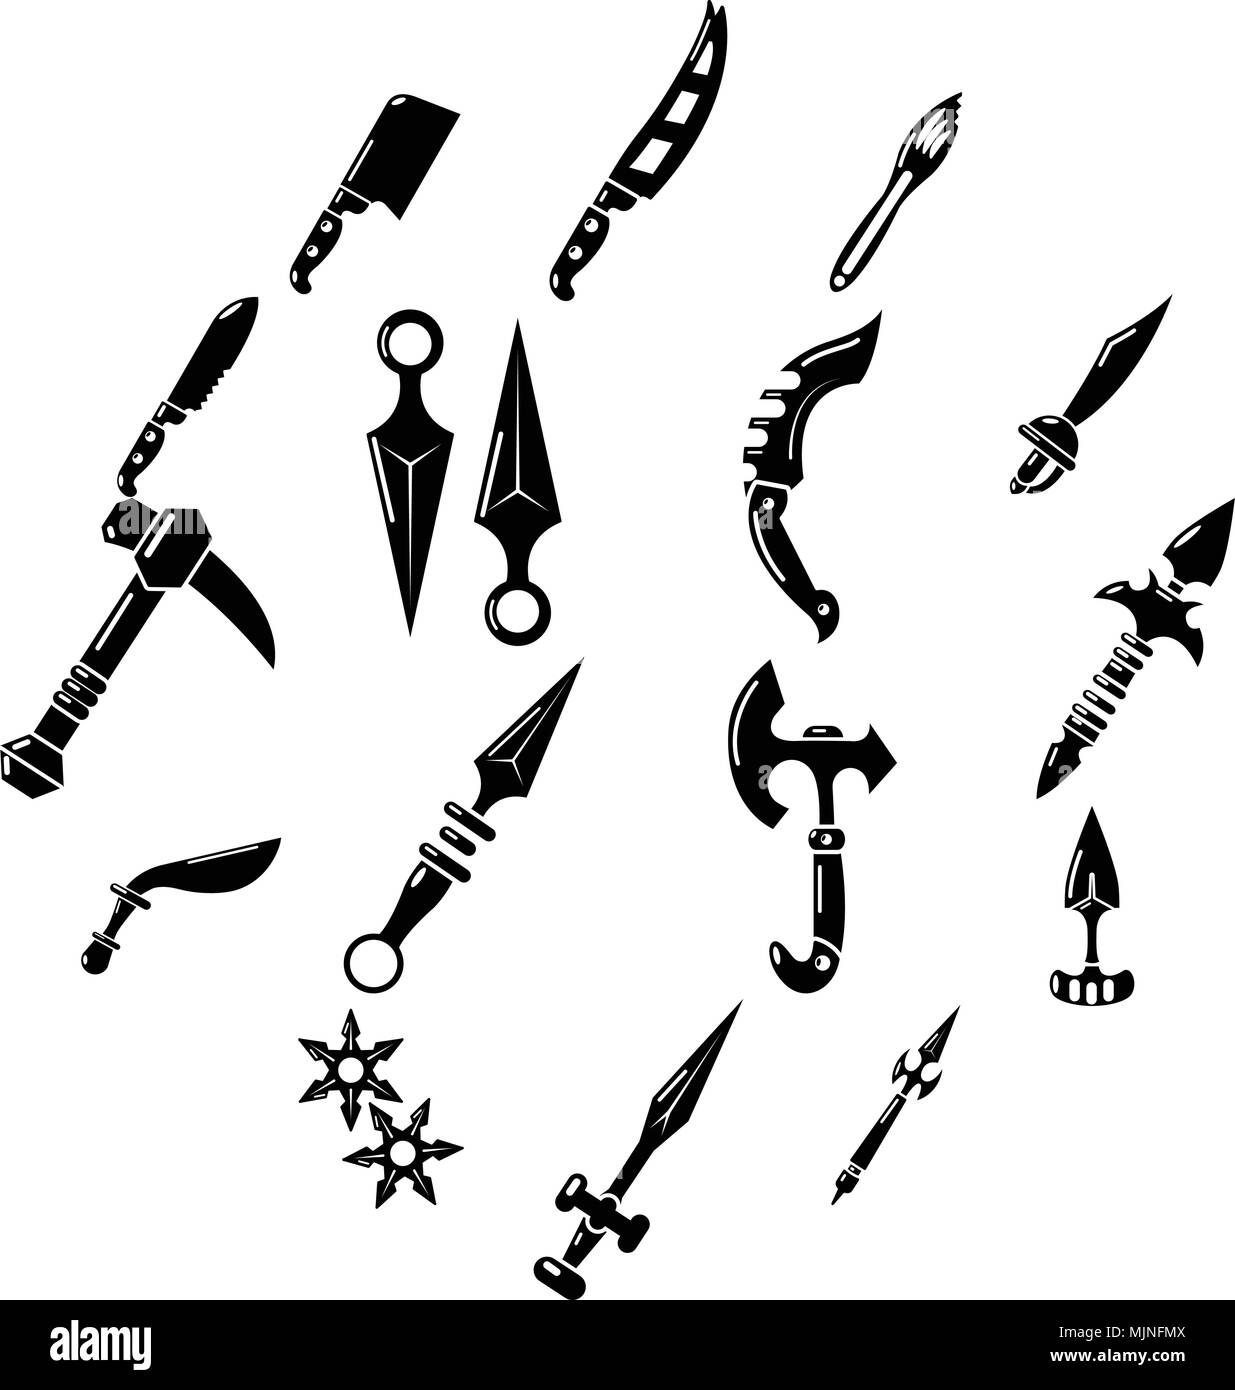 Steel arms items icons set, simple style Stock Vector